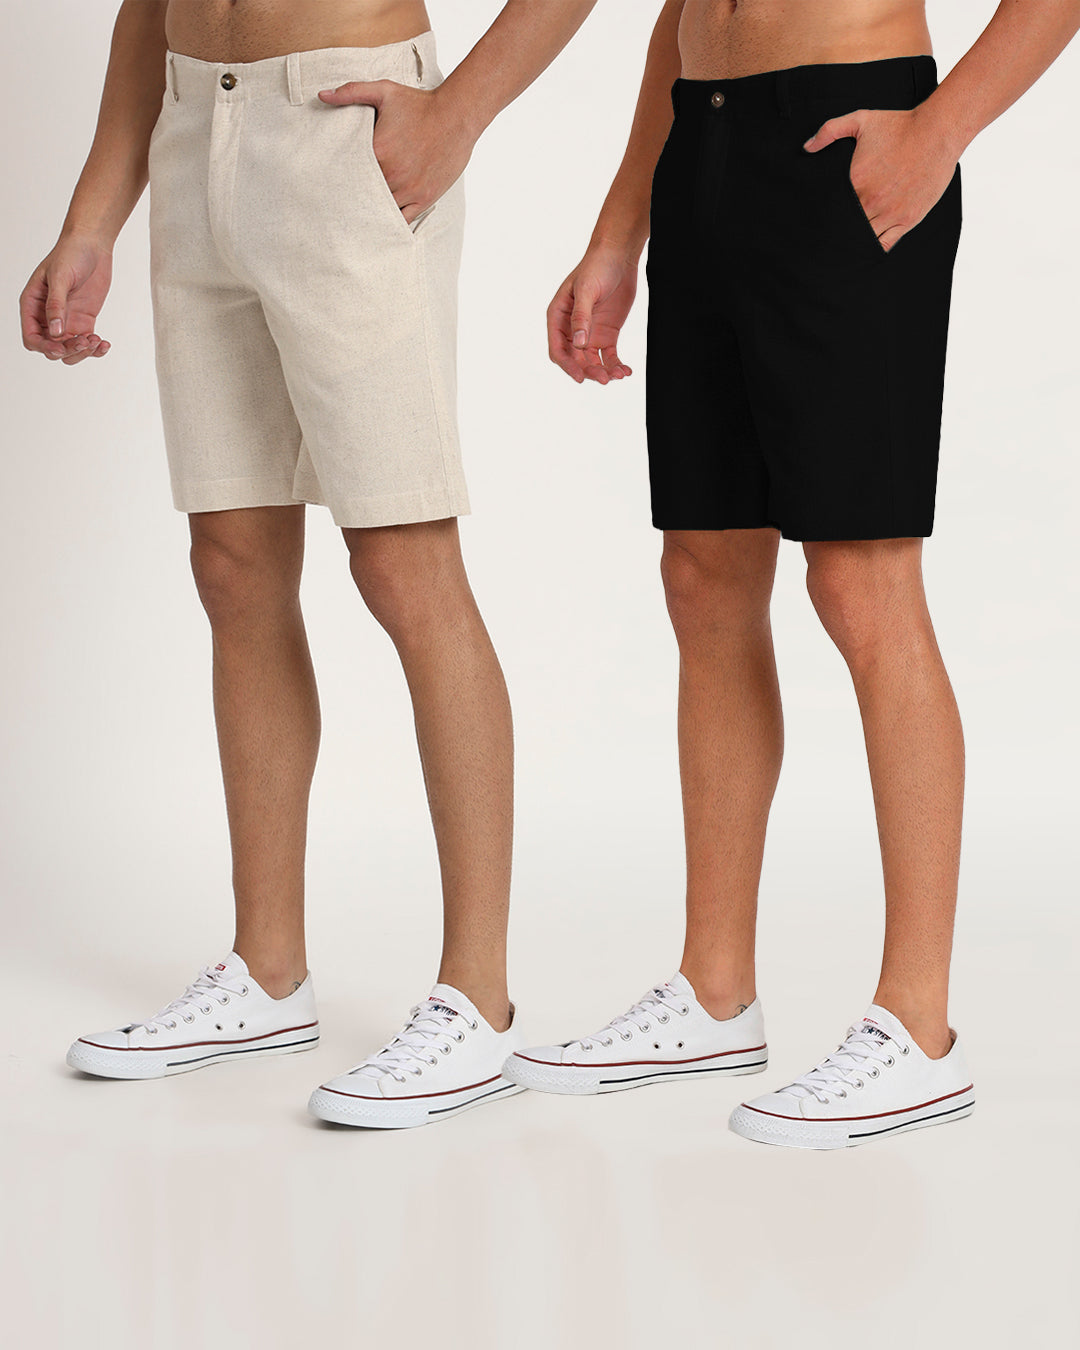 Combo : Ready For Anything Black & Beige Men's Shorts